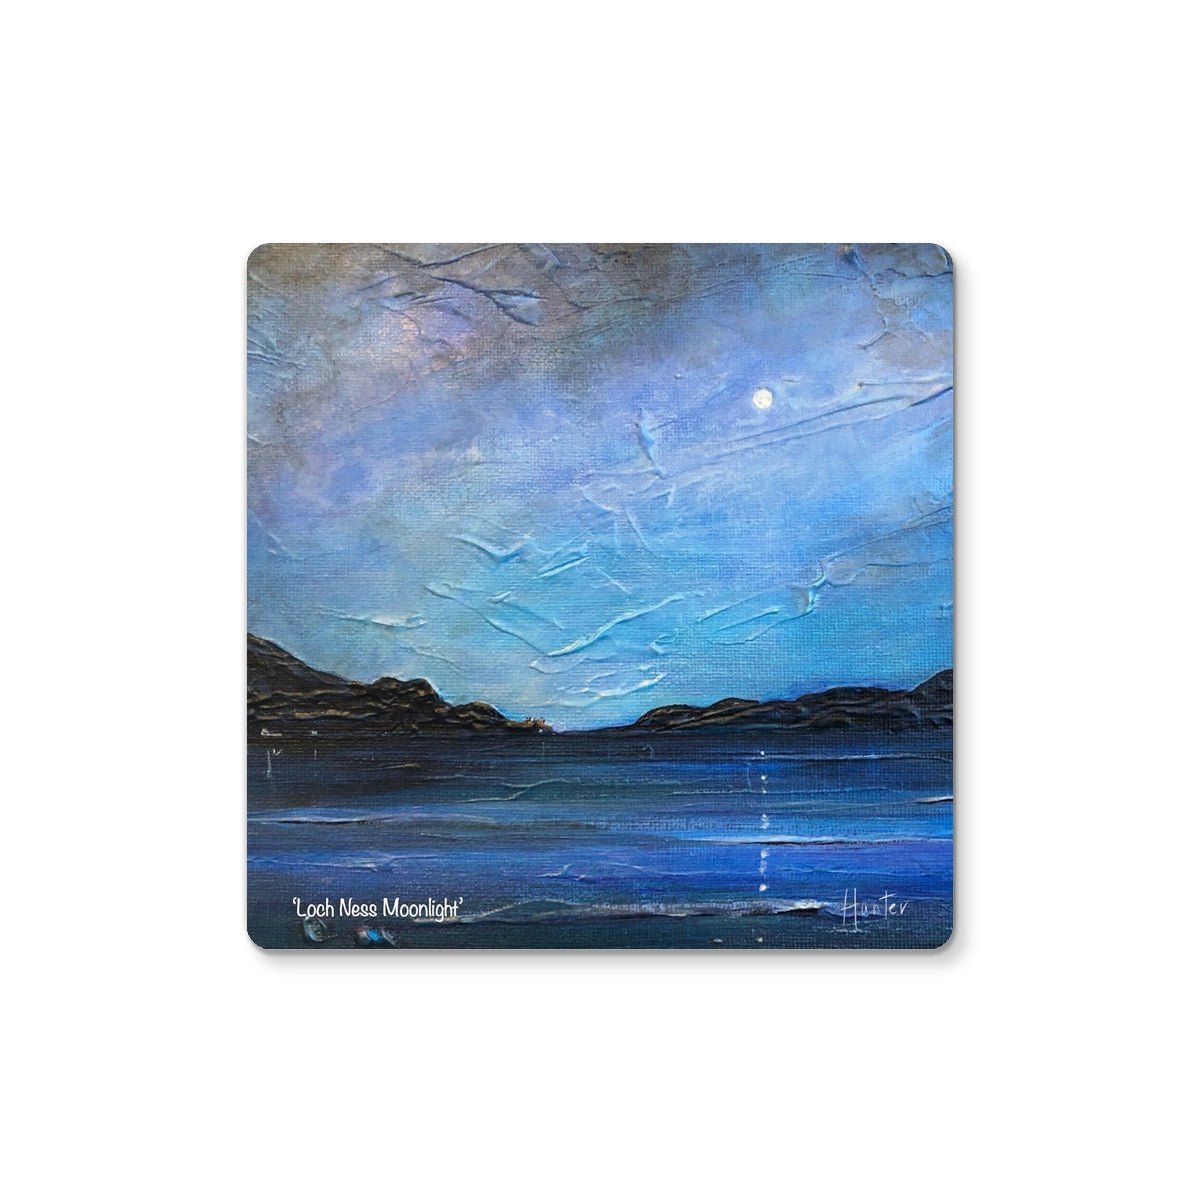 Loch Ness Moonlight Art Gifts Coaster-Coasters-Scottish Lochs & Mountains Art Gallery-6 Coasters-Paintings, Prints, Homeware, Art Gifts From Scotland By Scottish Artist Kevin Hunter